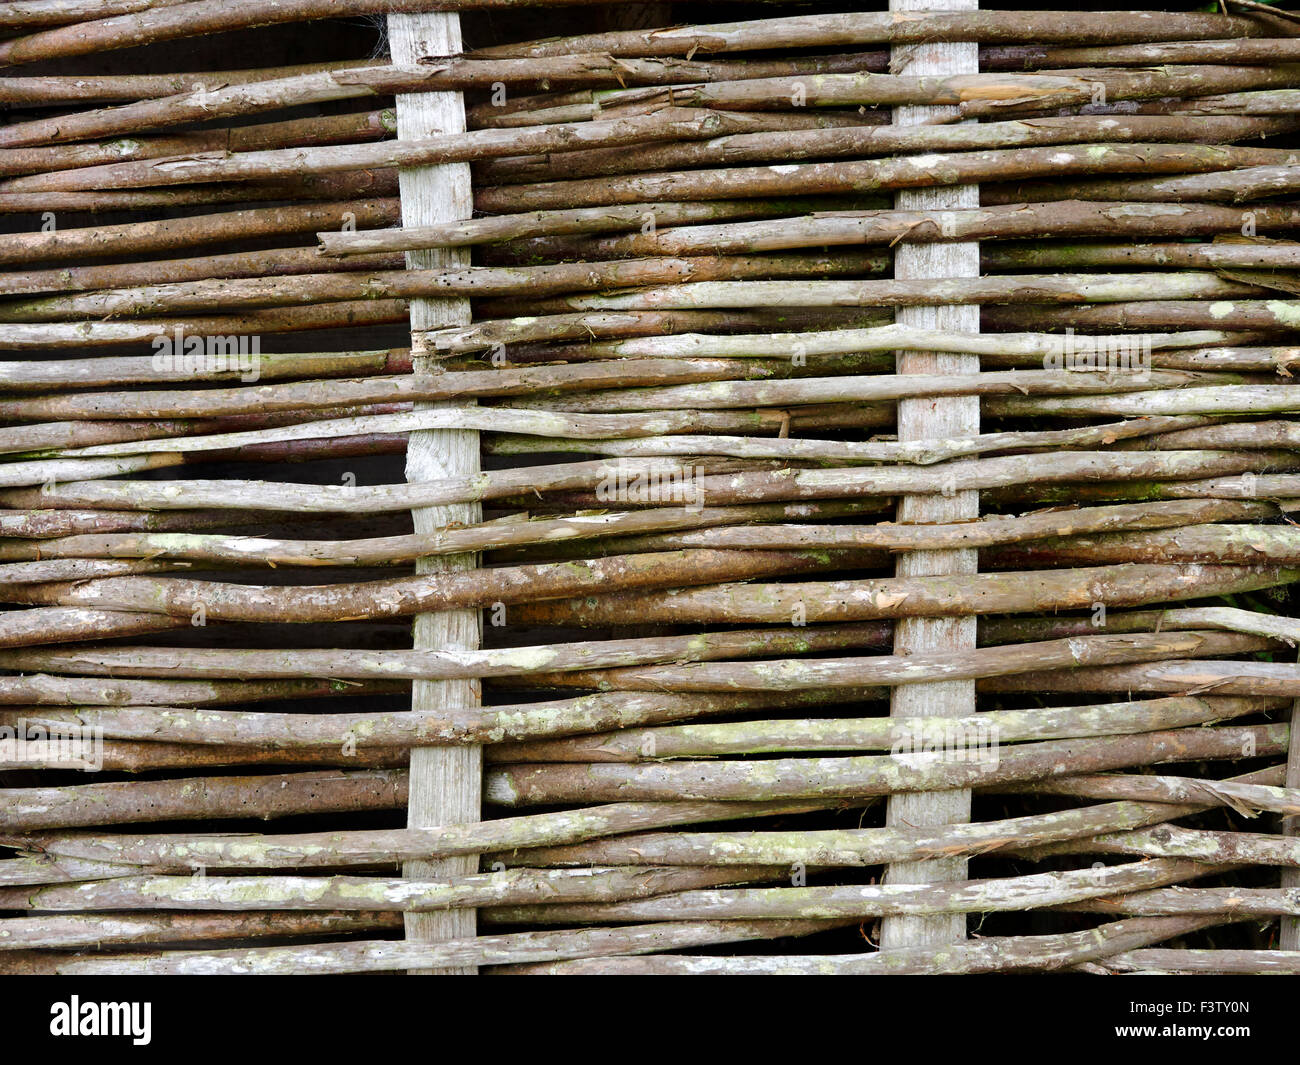 Wattle wall made by weaving pliable hazel wood around uprights. This was often covered in a clay/straw/dung plaster called daub. Stock Photo